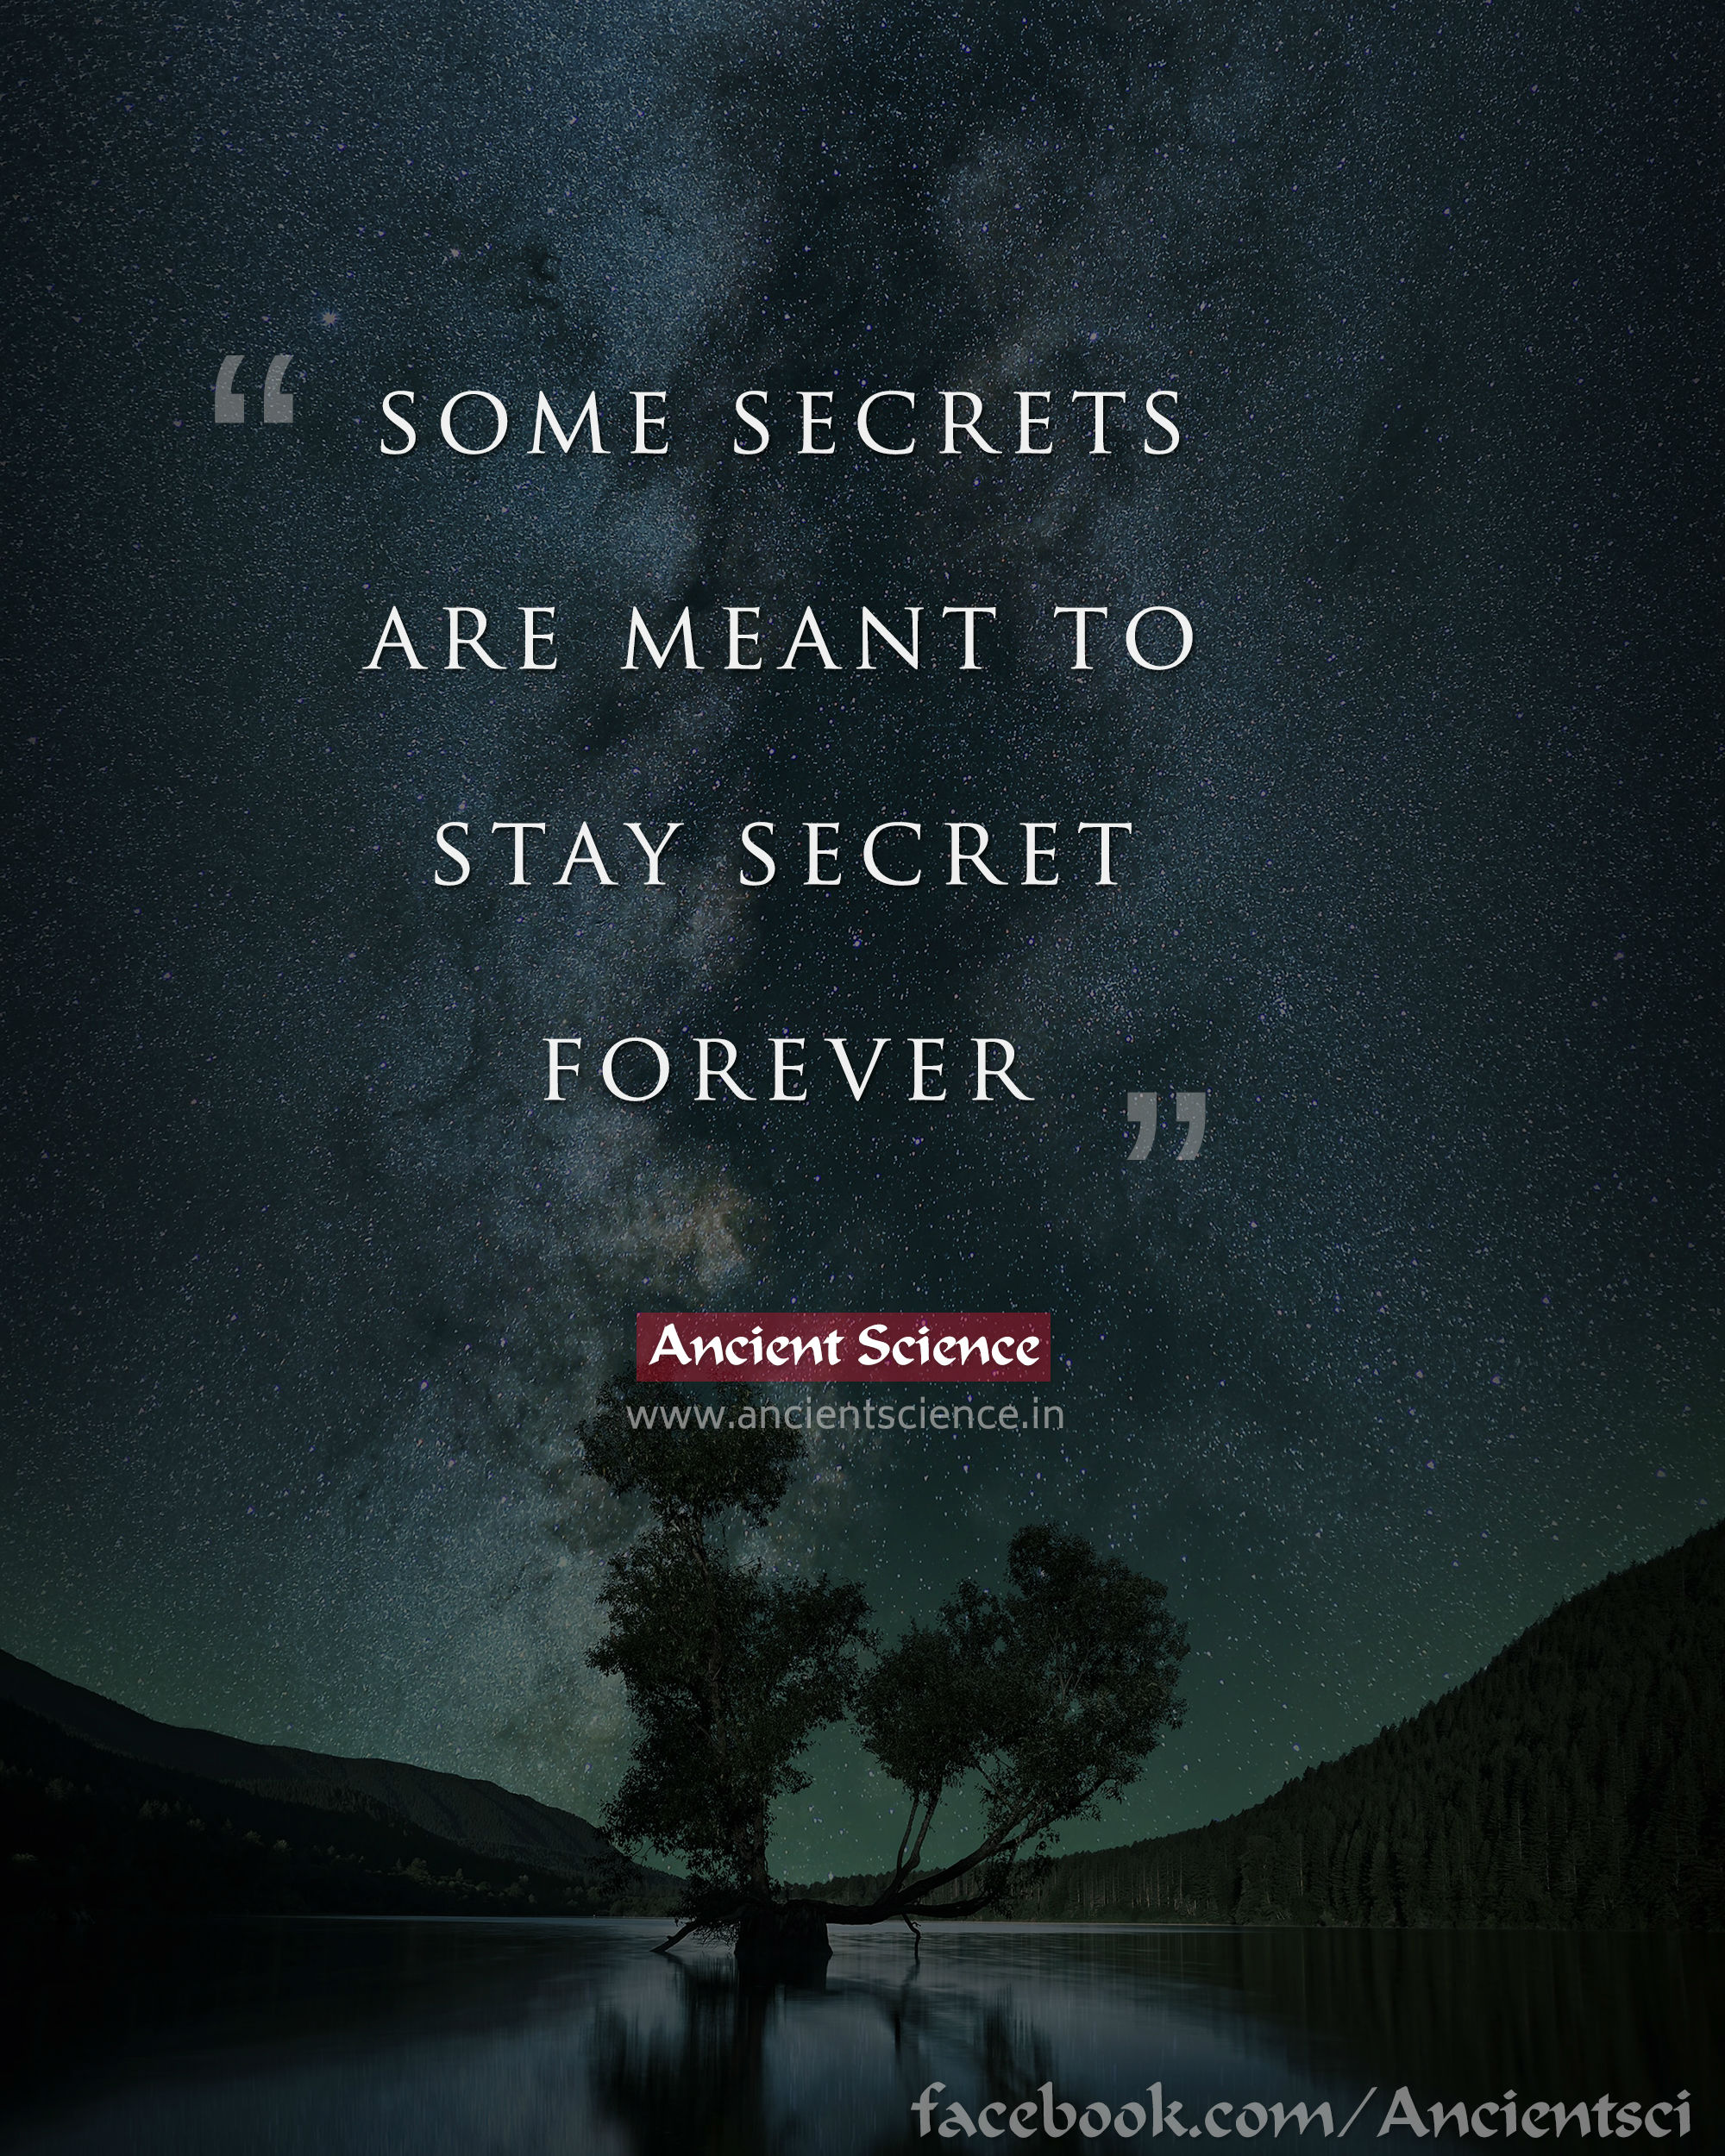 Some secrets are meant to stay secret forever.